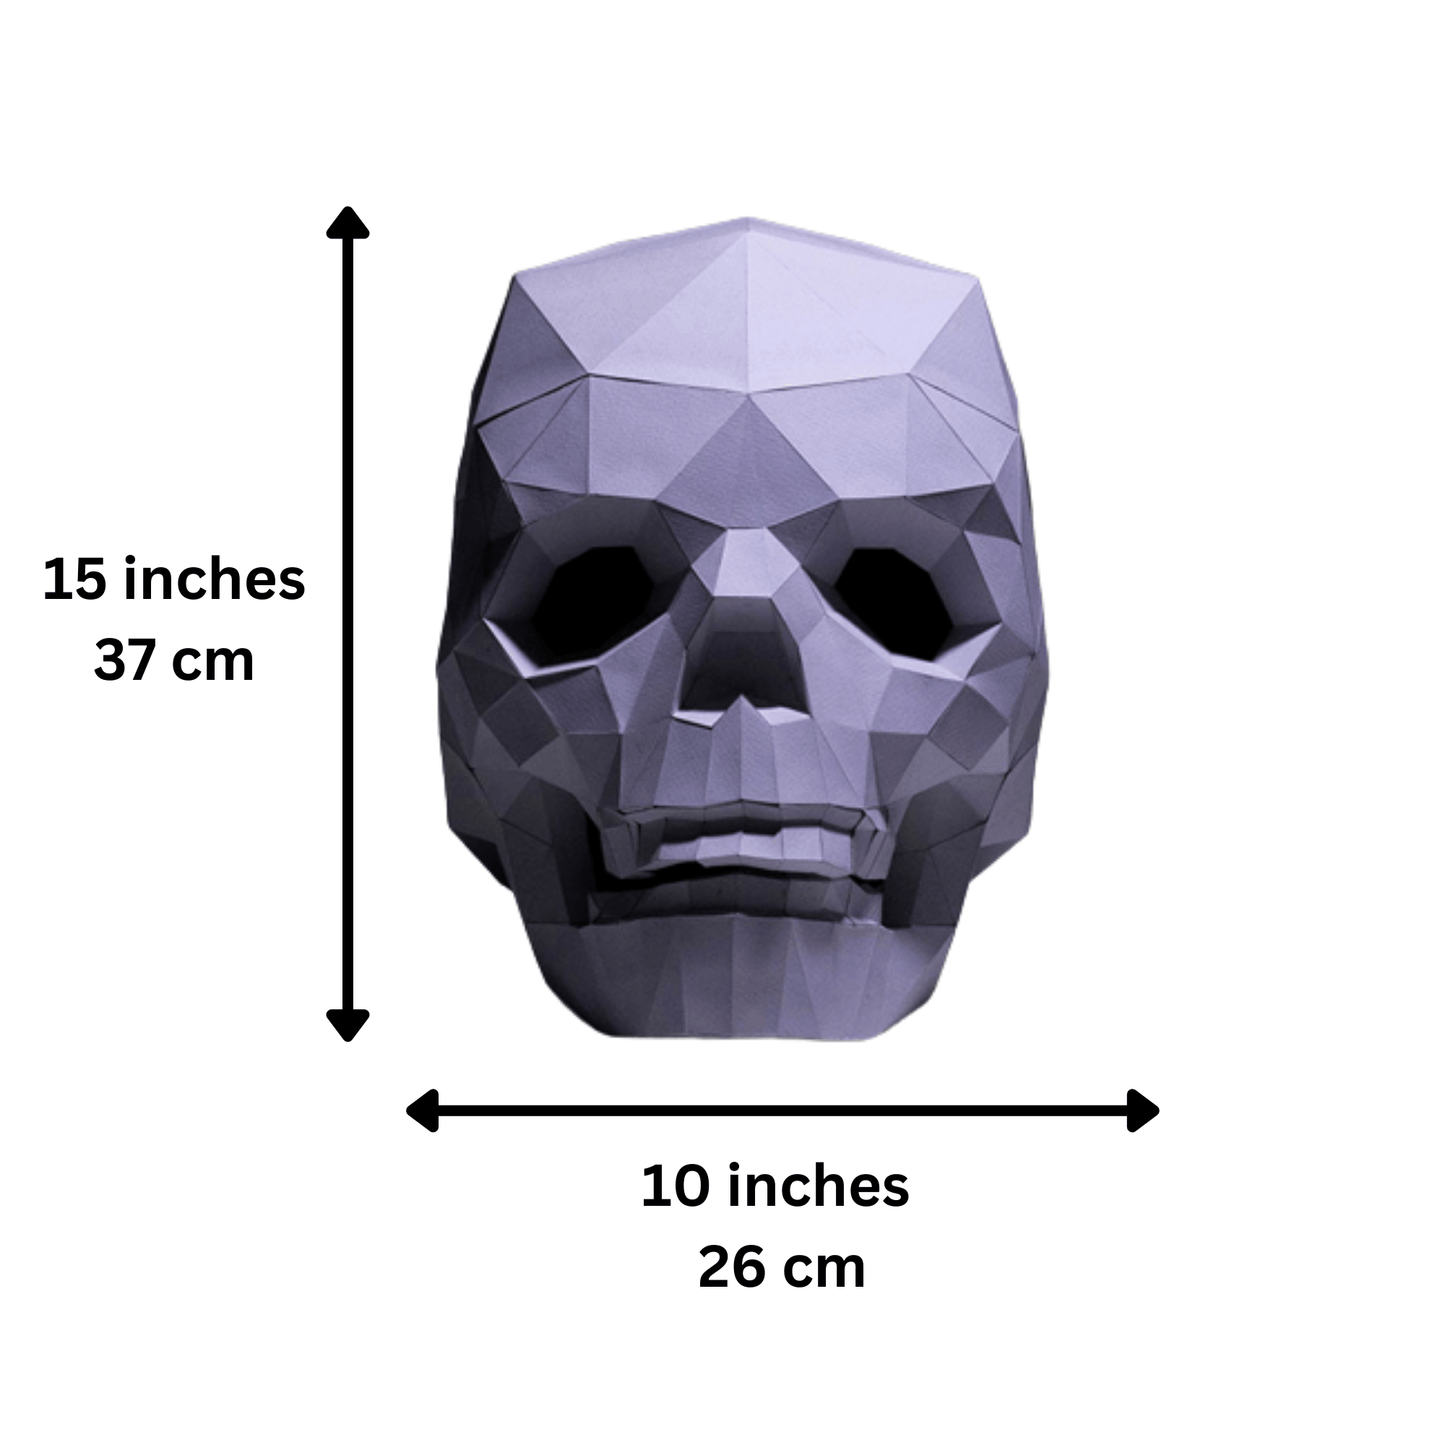 PAPERCRAFT WORLD - Low Poly Skull PaperCraft Origami Model